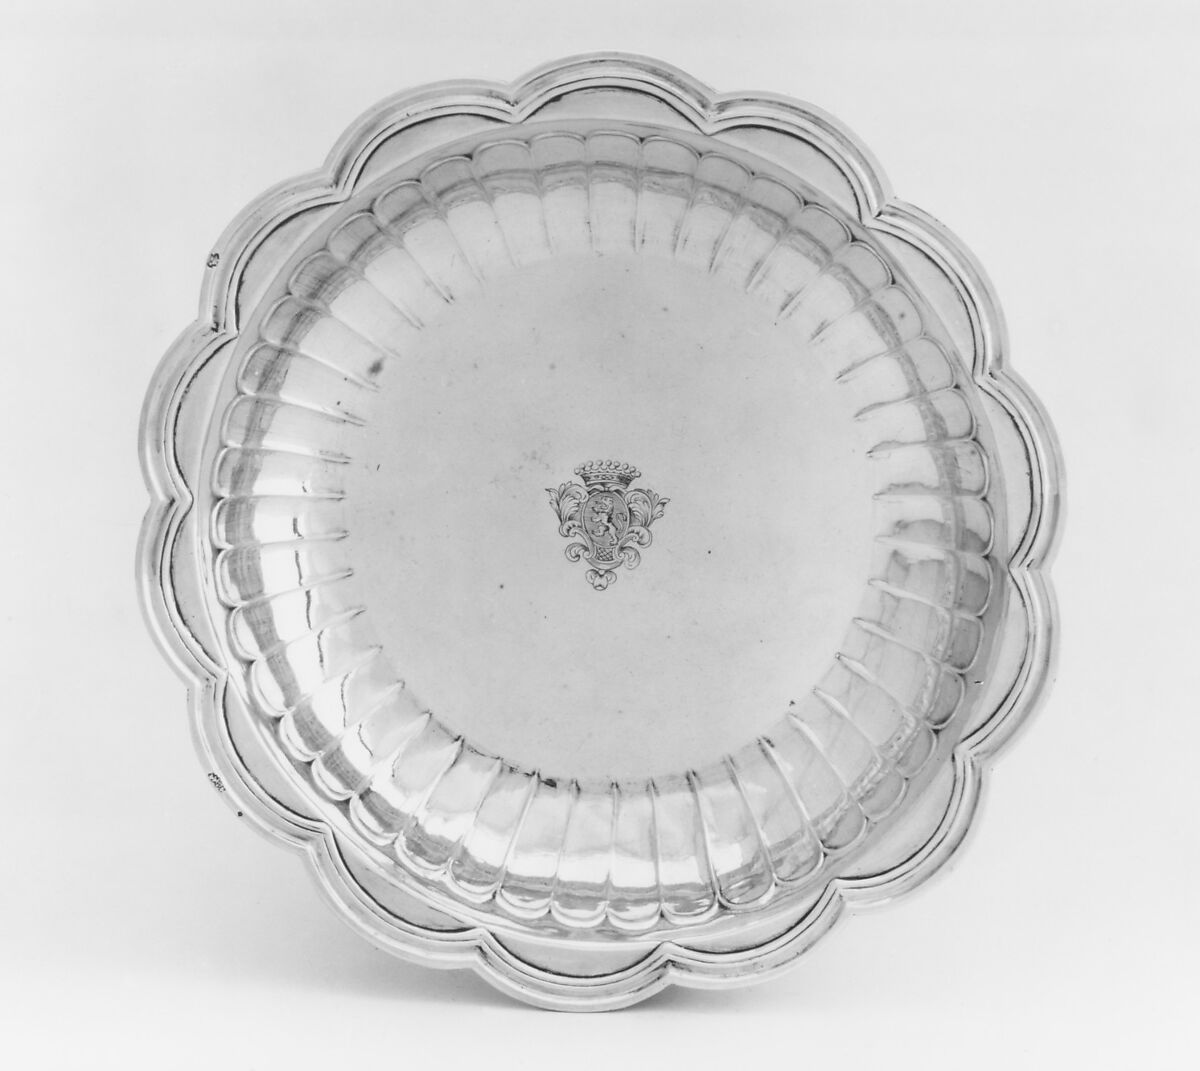 Dish, Philippe-Jacques Langlois (master 1708, active 1742), Silver, French, Paris 